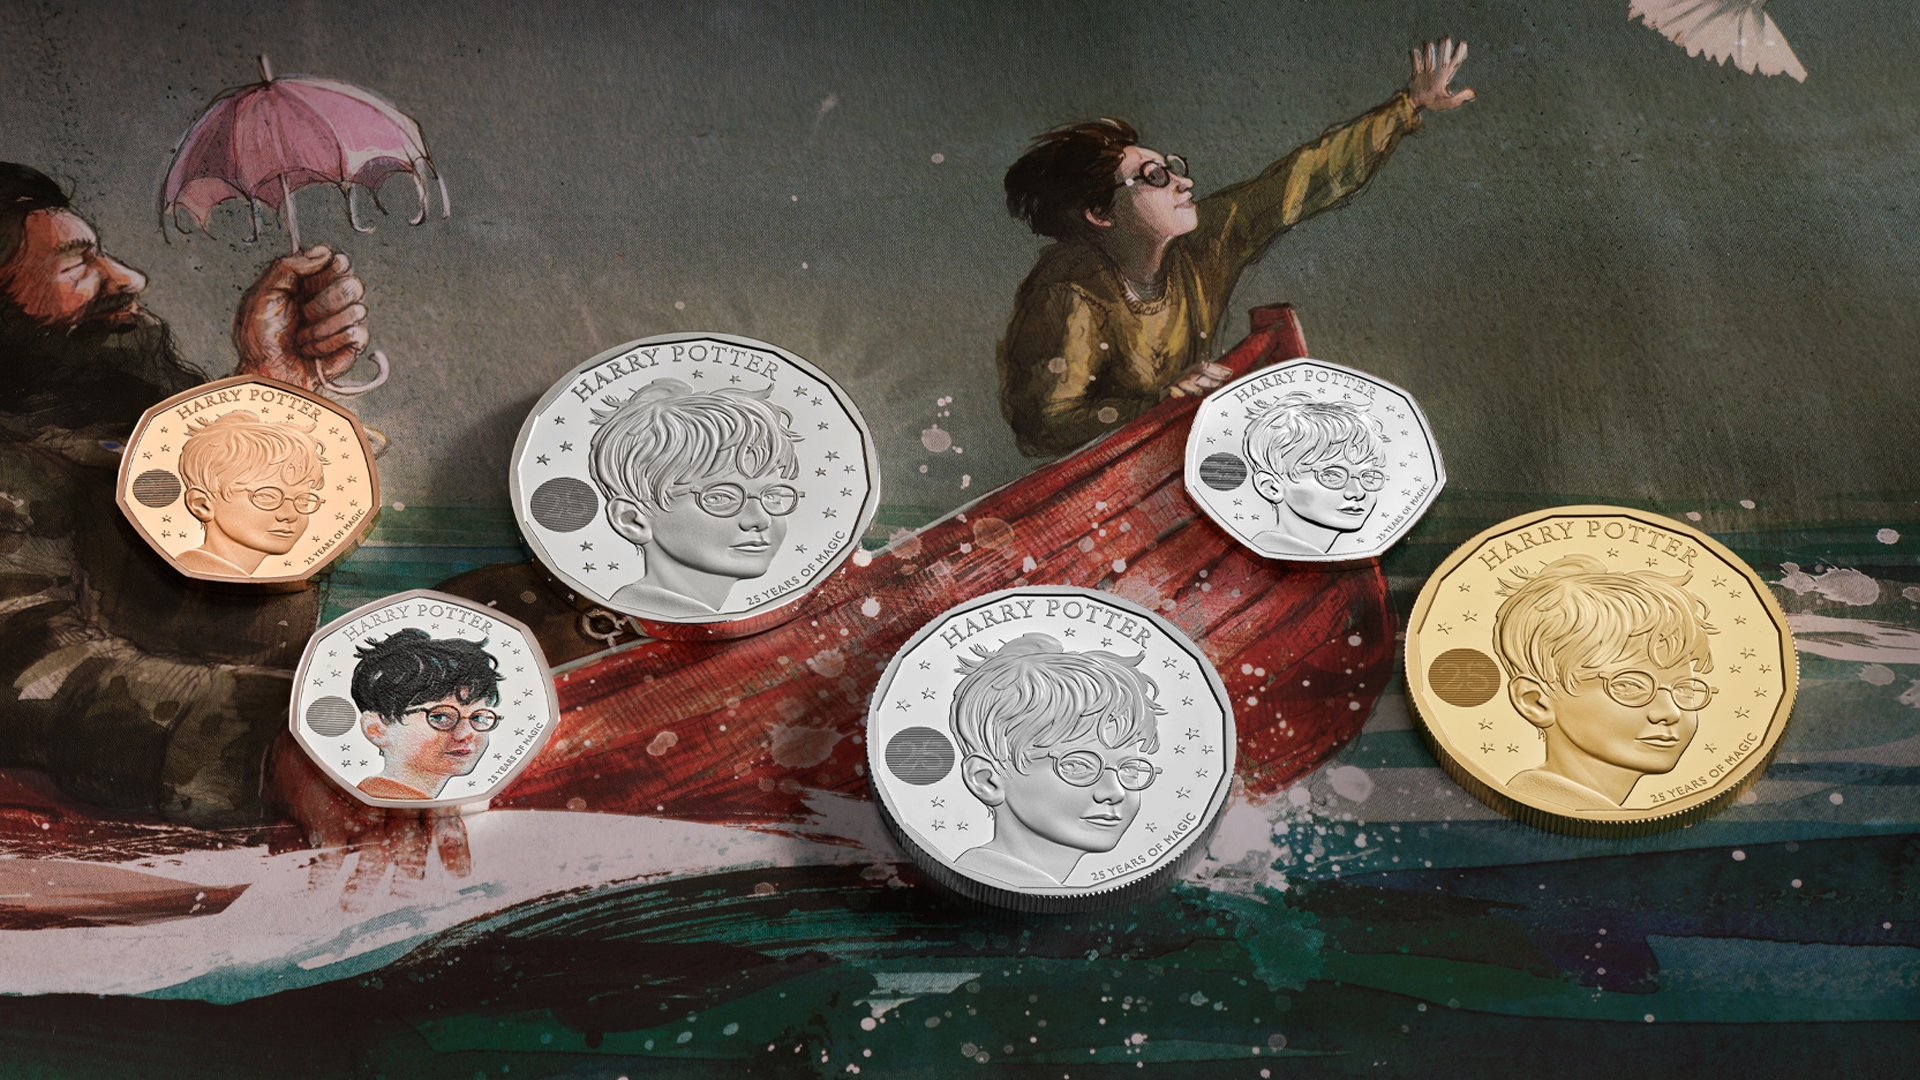 The Harry Potter coin is the first of four to be released